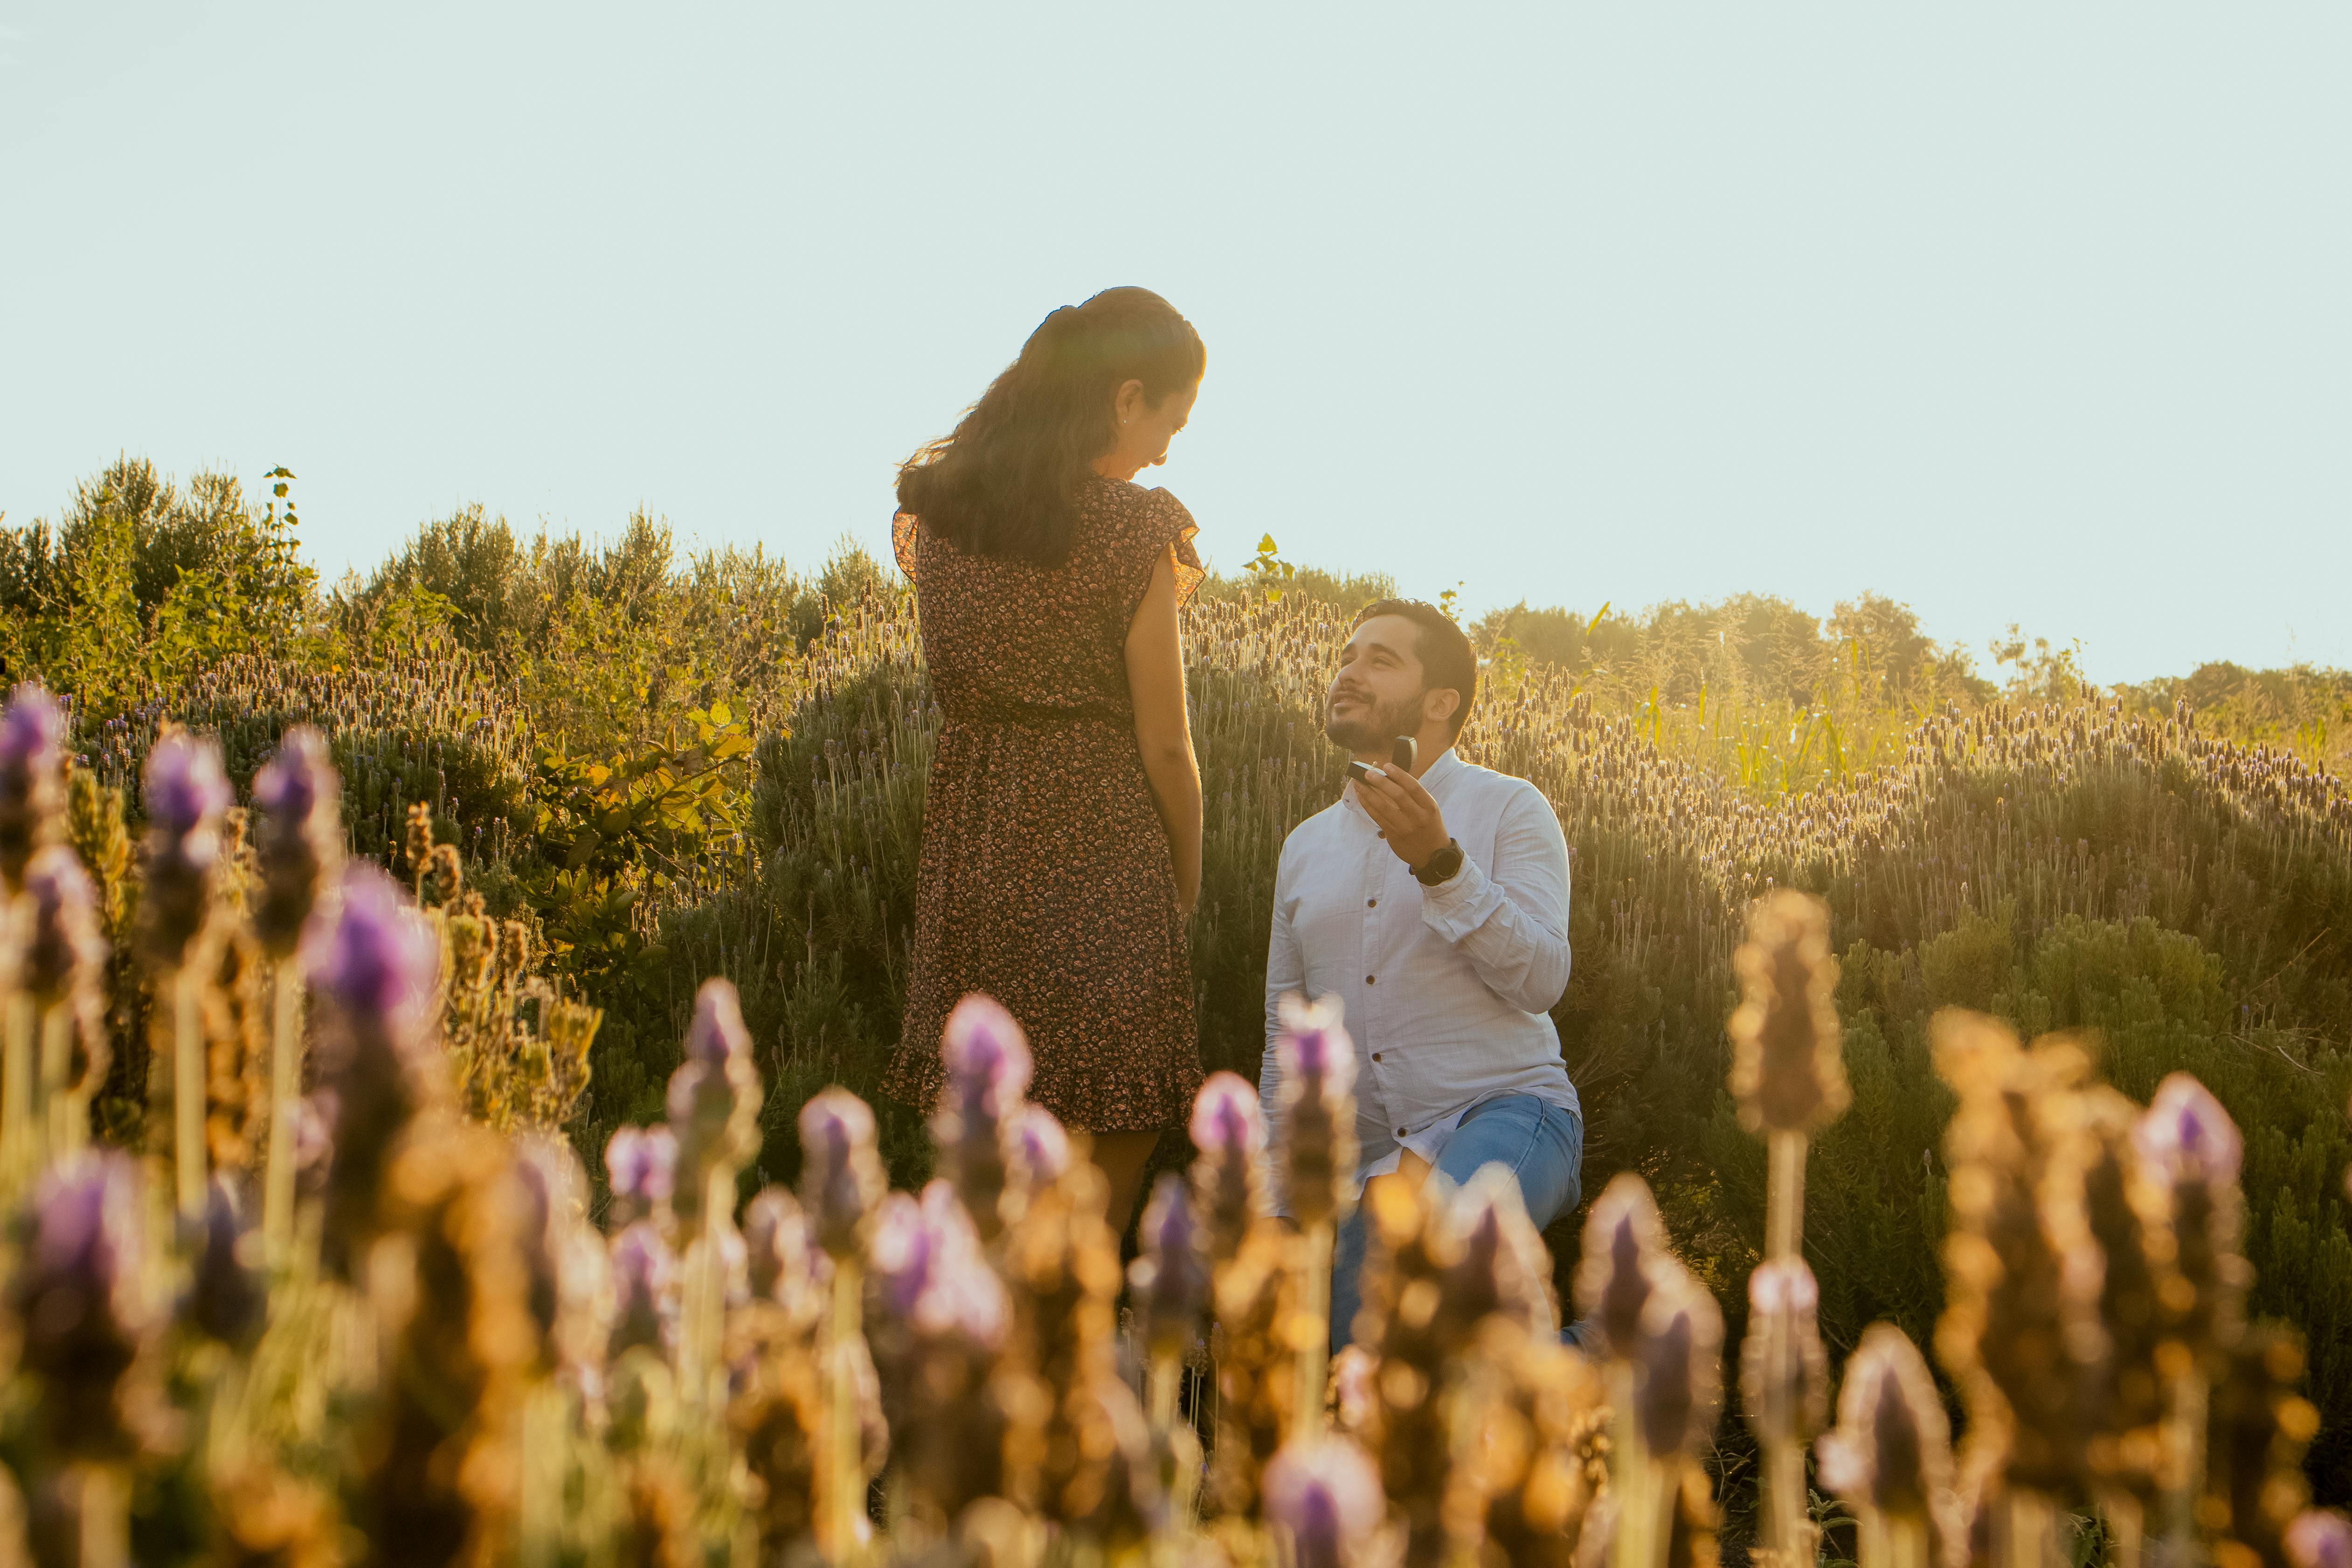 A man proposing to his girlfriend on a lavender field | Source: Pexels